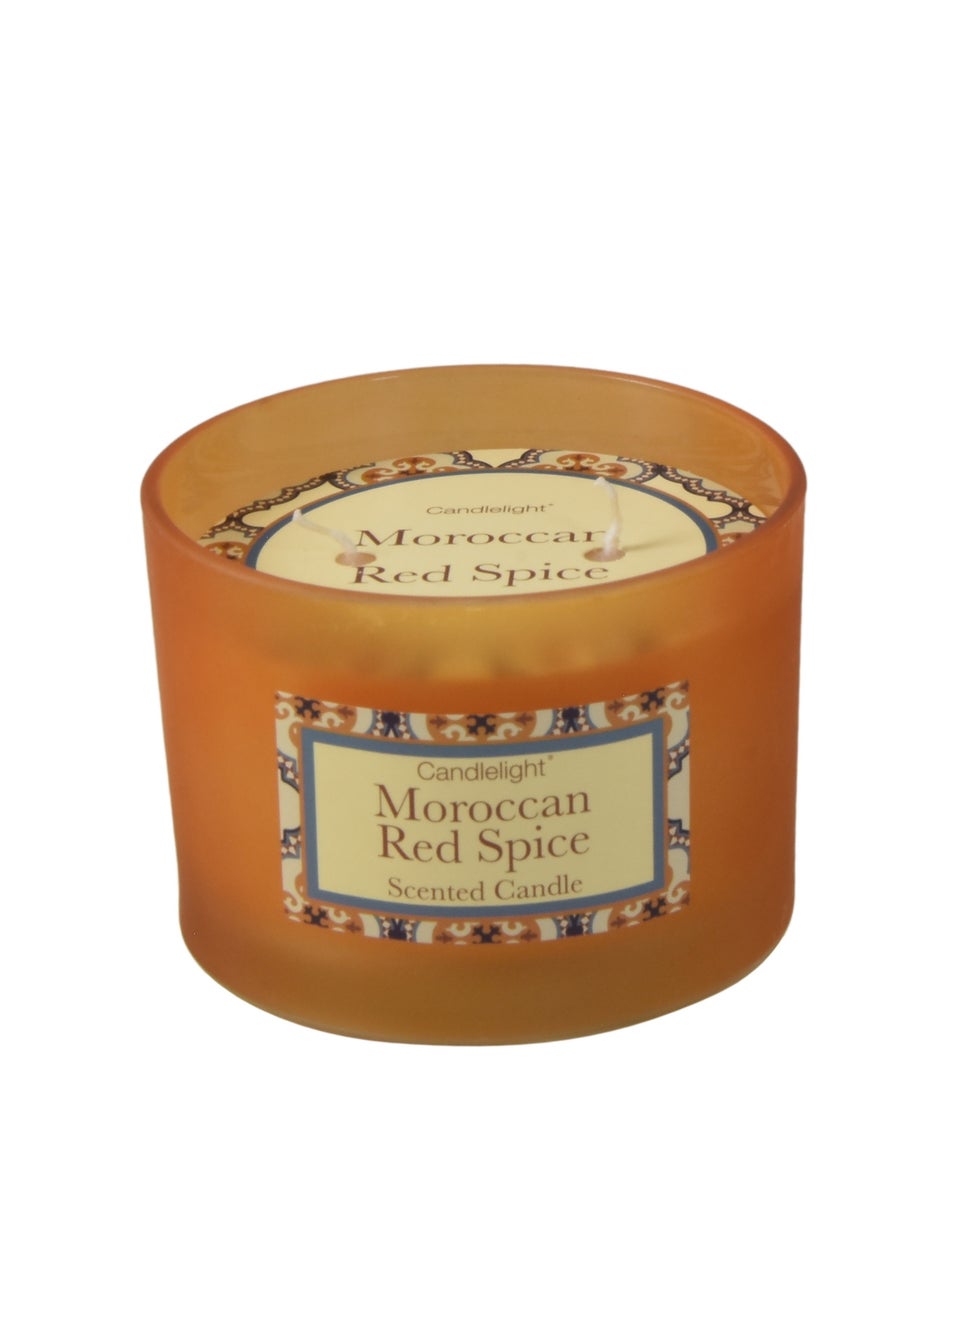 Candlelight Moroccan Red Spice Scented Candle